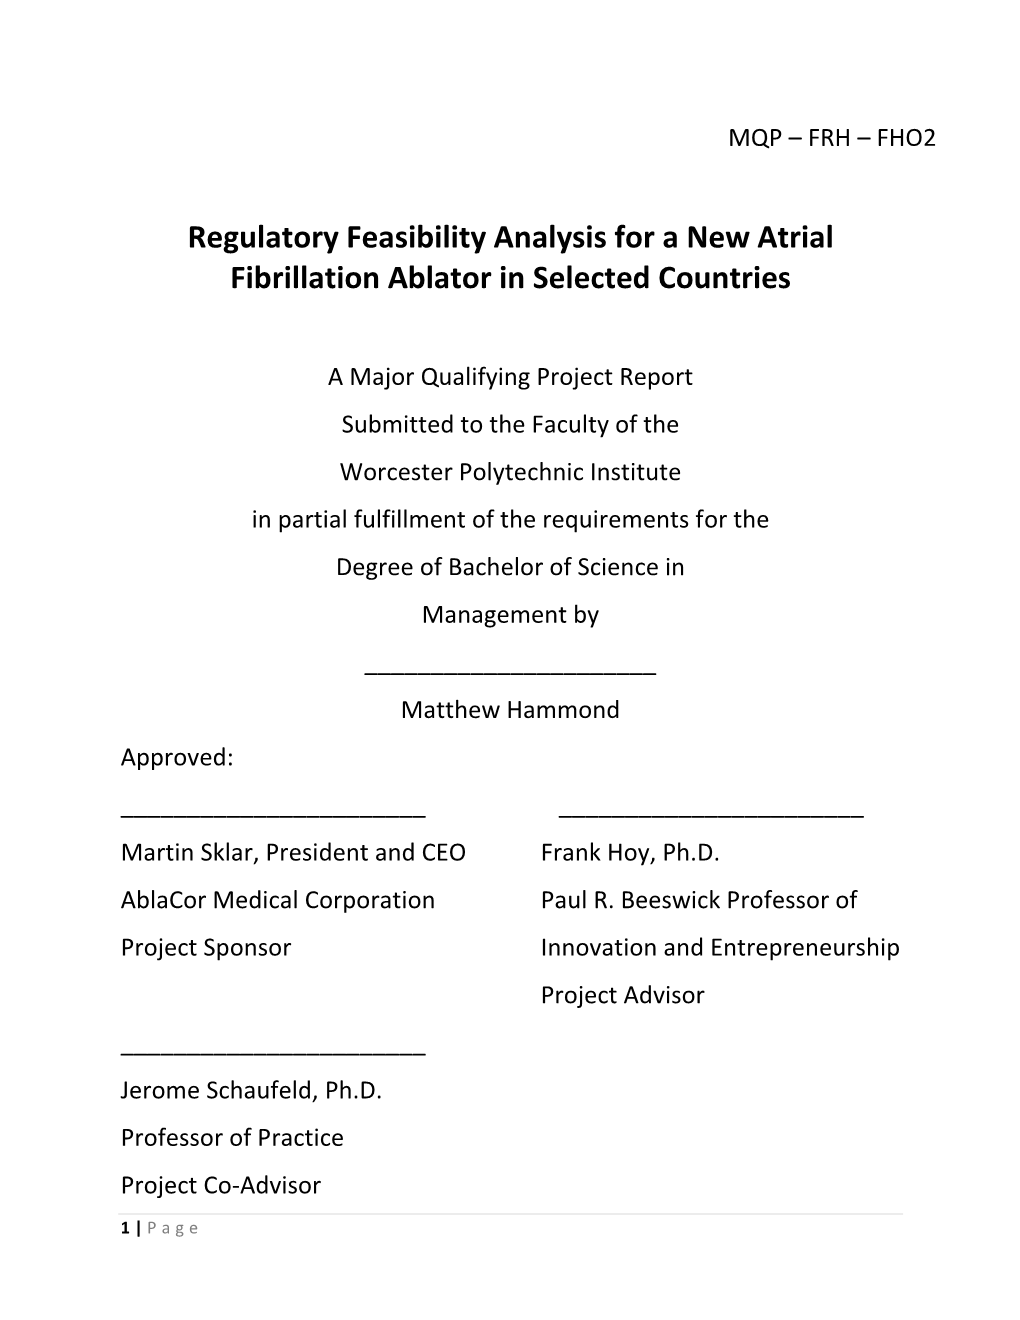 Regulatory Feasibility Analysis for a New Atrial Fibrillation Ablator in Selected Countries